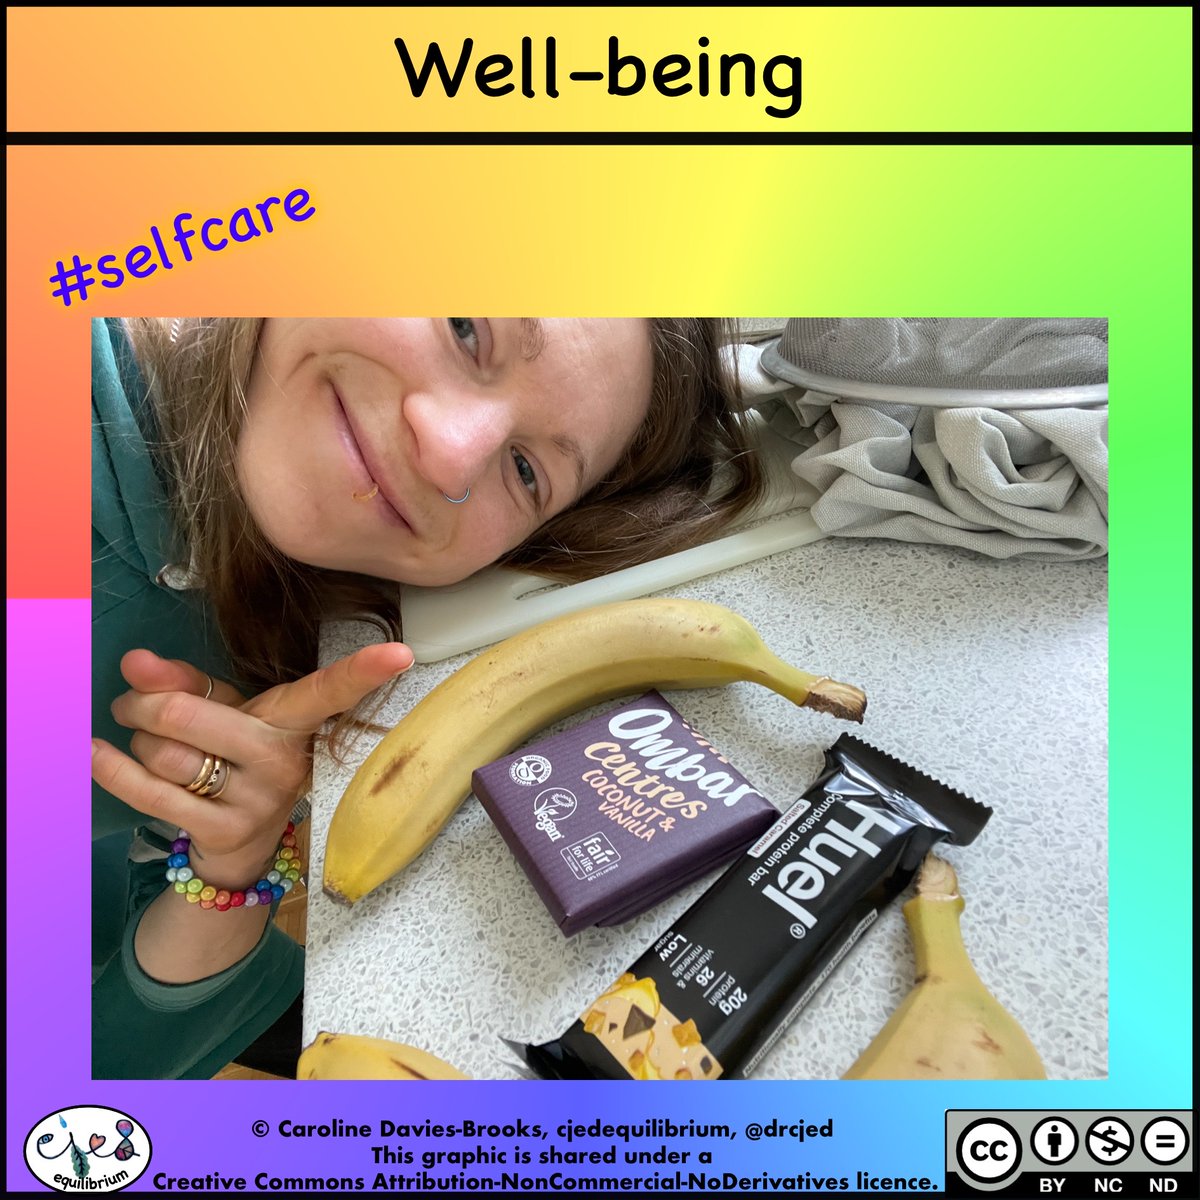 #selfcare #selfcaresaturday #nutritioniseverything #wfpb #plantbasedliving #huel #banana @huel  Huel @OmbarChocolate Ombar Chocolate #recovery #restday #wellbeing